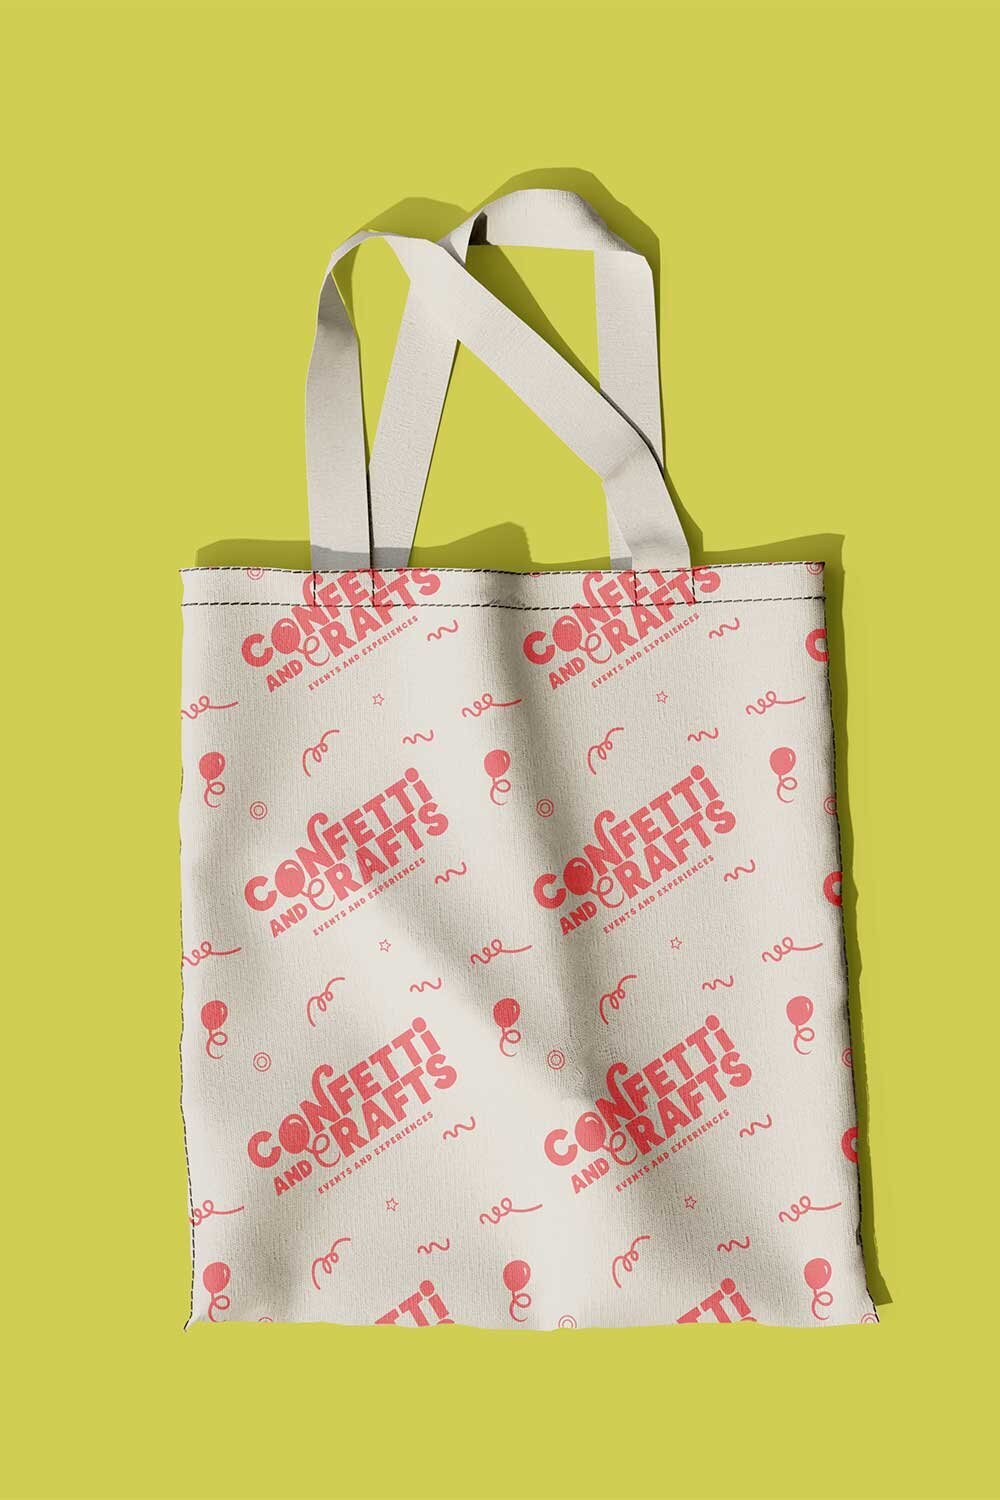 Branded tote bag for Confetti and Crafts